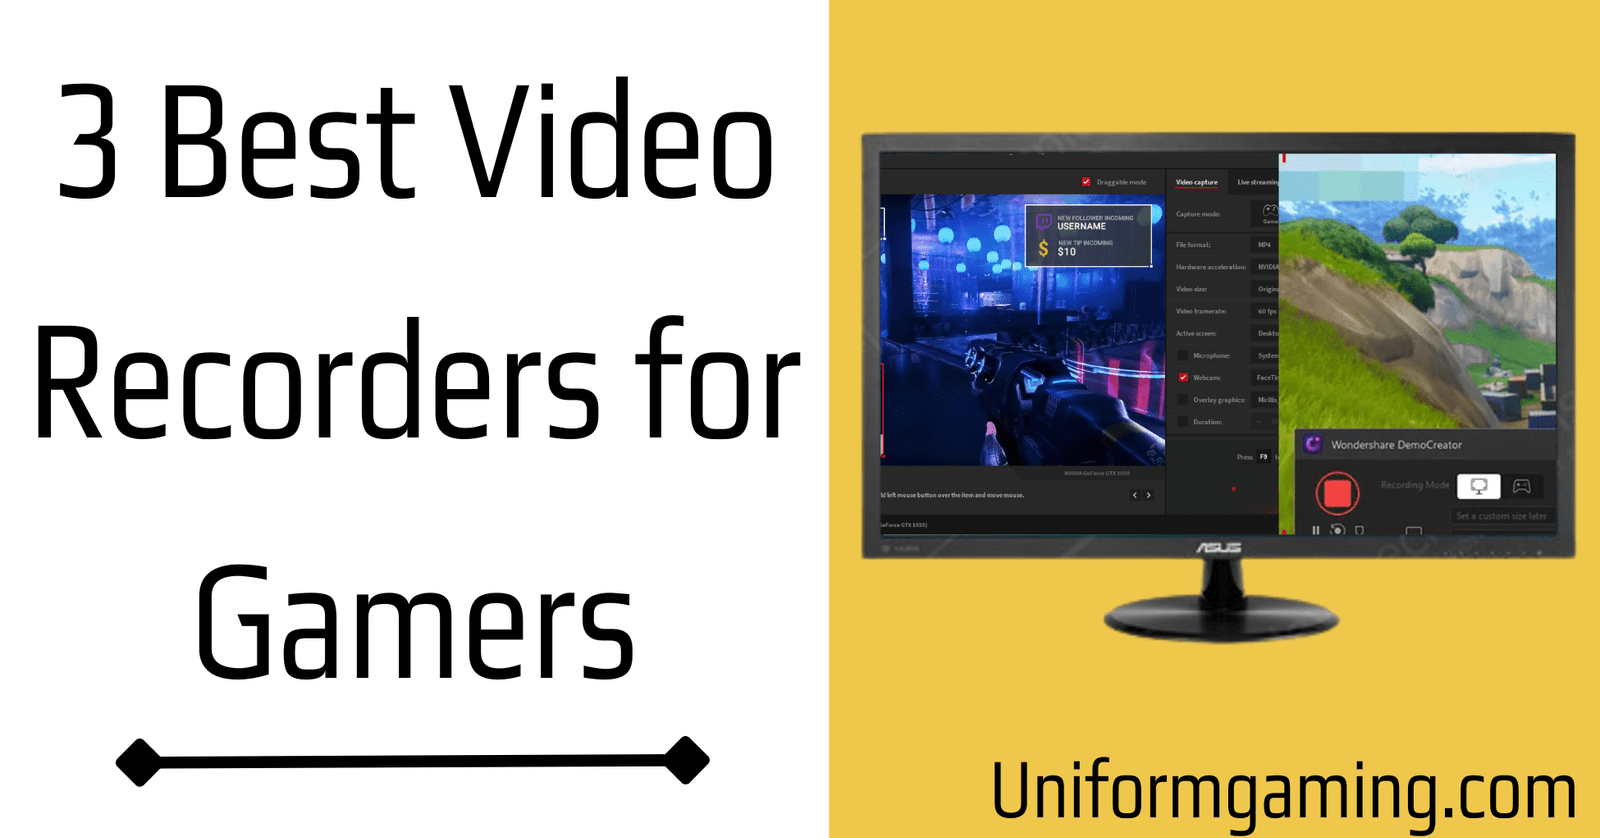 3 Best Video Recorders for Gamers 